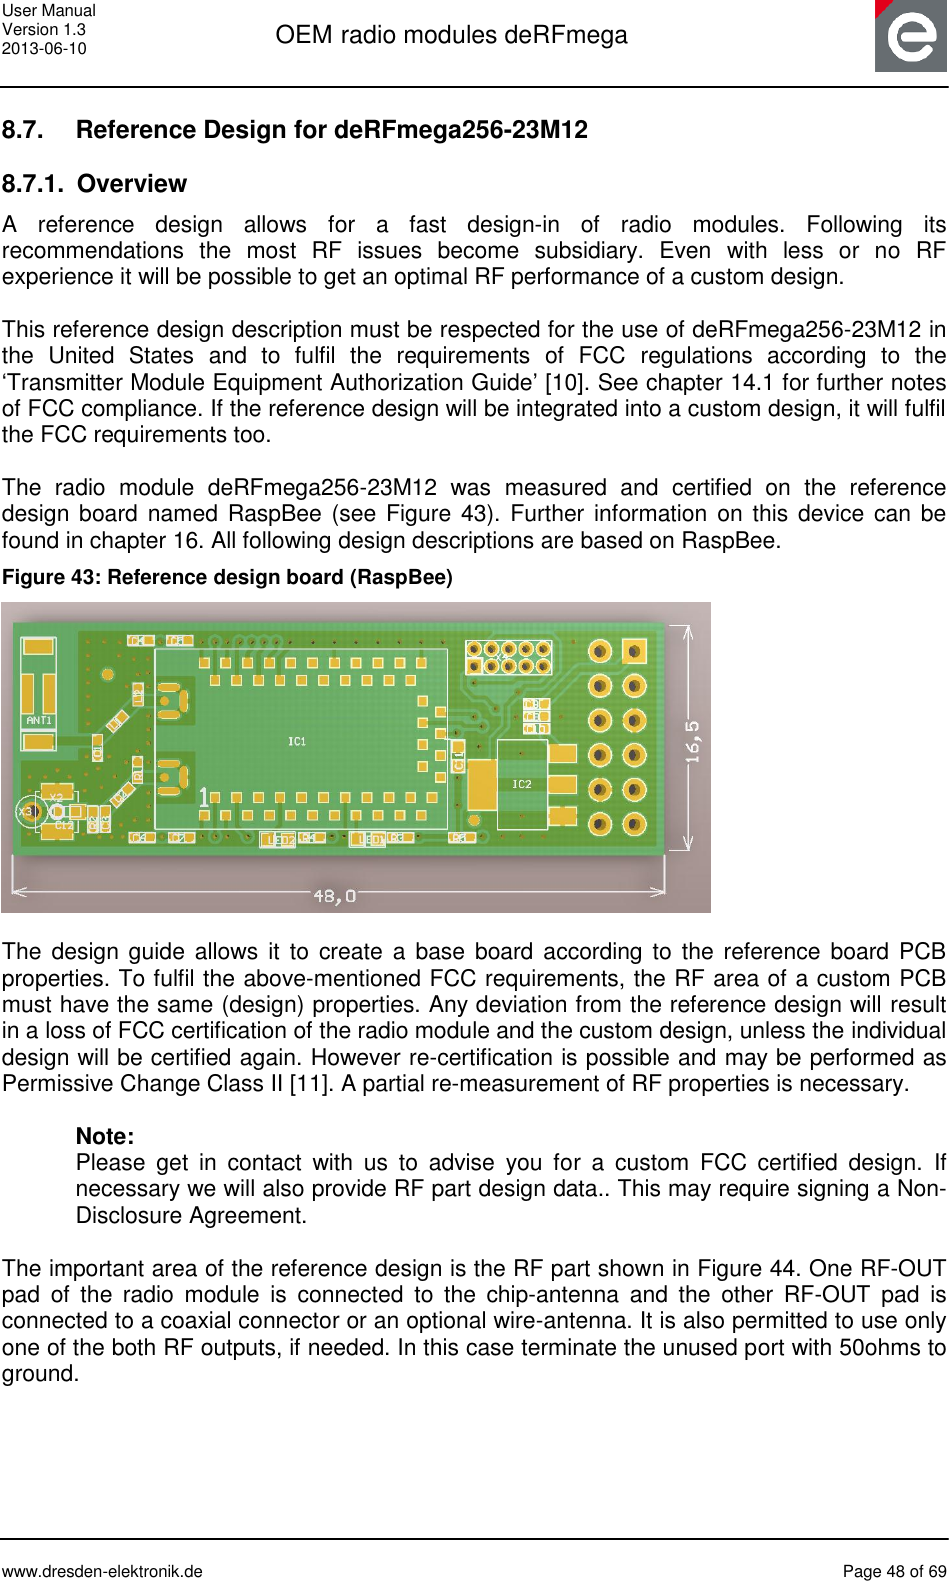 User Manual Version 1.3 2013-06-10  OEM radio modules deRFmega      www.dresden-elektronik.de  Page 48 of 69  8.7.  Reference Design for deRFmega256-23M12 8.7.1.  Overview A  reference  design  allows  for  a  fast  design-in  of  radio  modules.  Following  its recommendations  the  most  RF  issues  become  subsidiary.  Even  with  less  or  no  RF experience it will be possible to get an optimal RF performance of a custom design.  This reference design description must be respected for the use of deRFmega256-23M12 in the  United  States  and  to  fulfil  the  requirements  of  FCC  regulations  according  to  the ‘Transmitter Module Equipment Authorization Guide’ [10]. See chapter 14.1 for further notes of FCC compliance. If the reference design will be integrated into a custom design, it will fulfil the FCC requirements too.  The  radio  module  deRFmega256-23M12  was  measured  and  certified  on  the  reference design board  named  RaspBee (see Figure  43). Further information on this device can be found in chapter 16. All following design descriptions are based on RaspBee. Figure 43: Reference design board (RaspBee)   The  design guide allows  it  to  create a base board according to  the  reference board PCB properties. To fulfil the above-mentioned FCC requirements, the RF area of a custom PCB must have the same (design) properties. Any deviation from the reference design will result in a loss of FCC certification of the radio module and the custom design, unless the individual design will be certified again. However re-certification is possible and may be performed as Permissive Change Class II [11]. A partial re-measurement of RF properties is necessary.   Note: Please  get  in  contact  with  us  to  advise  you  for  a  custom  FCC  certified  design.  If necessary we will also provide RF part design data.. This may require signing a Non-Disclosure Agreement.  The important area of the reference design is the RF part shown in Figure 44. One RF-OUT pad  of  the  radio  module  is  connected  to  the  chip-antenna  and  the  other  RF-OUT  pad  is connected to a coaxial connector or an optional wire-antenna. It is also permitted to use only one of the both RF outputs, if needed. In this case terminate the unused port with 50ohms to ground.  